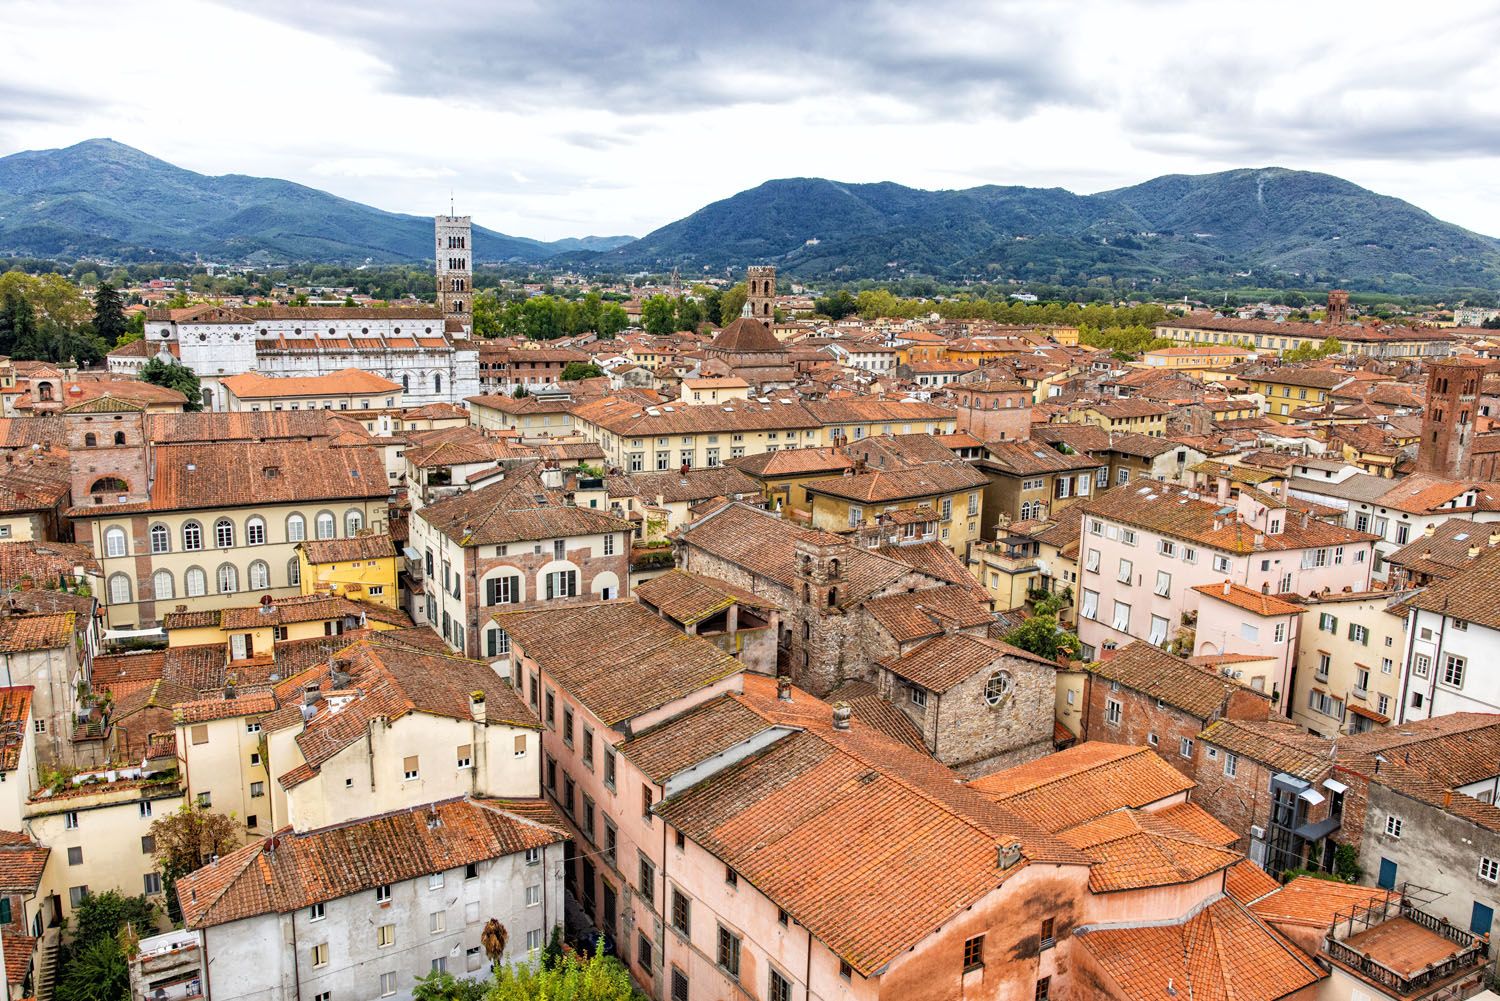 View of Lucca